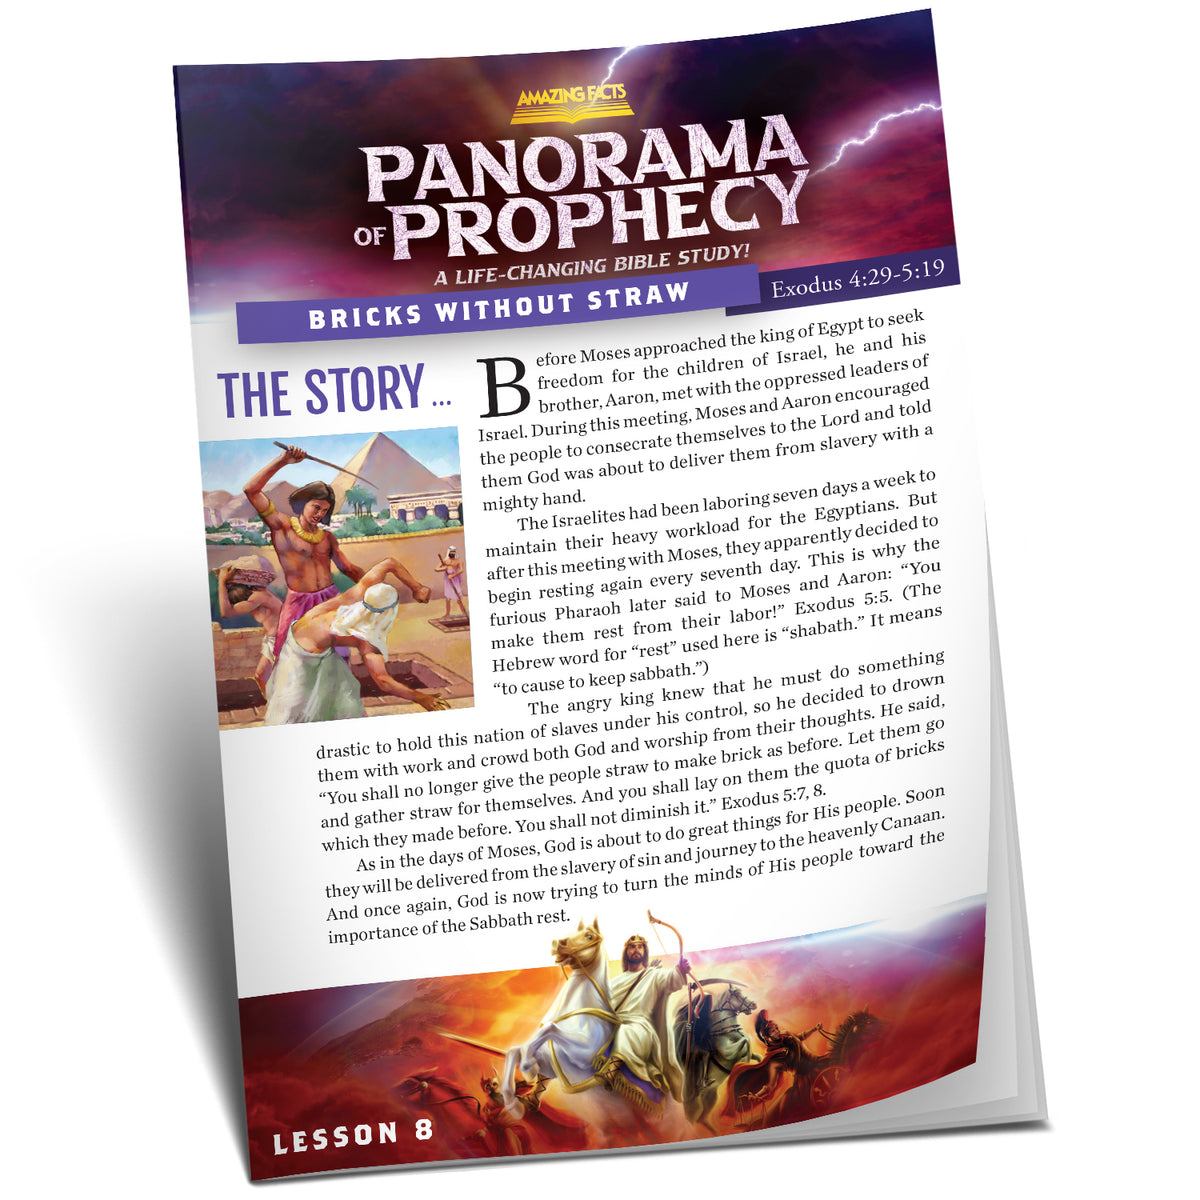 Panorama of Prophecy: Bricks Without Straw Study Guide 08 by Doug Batchelor